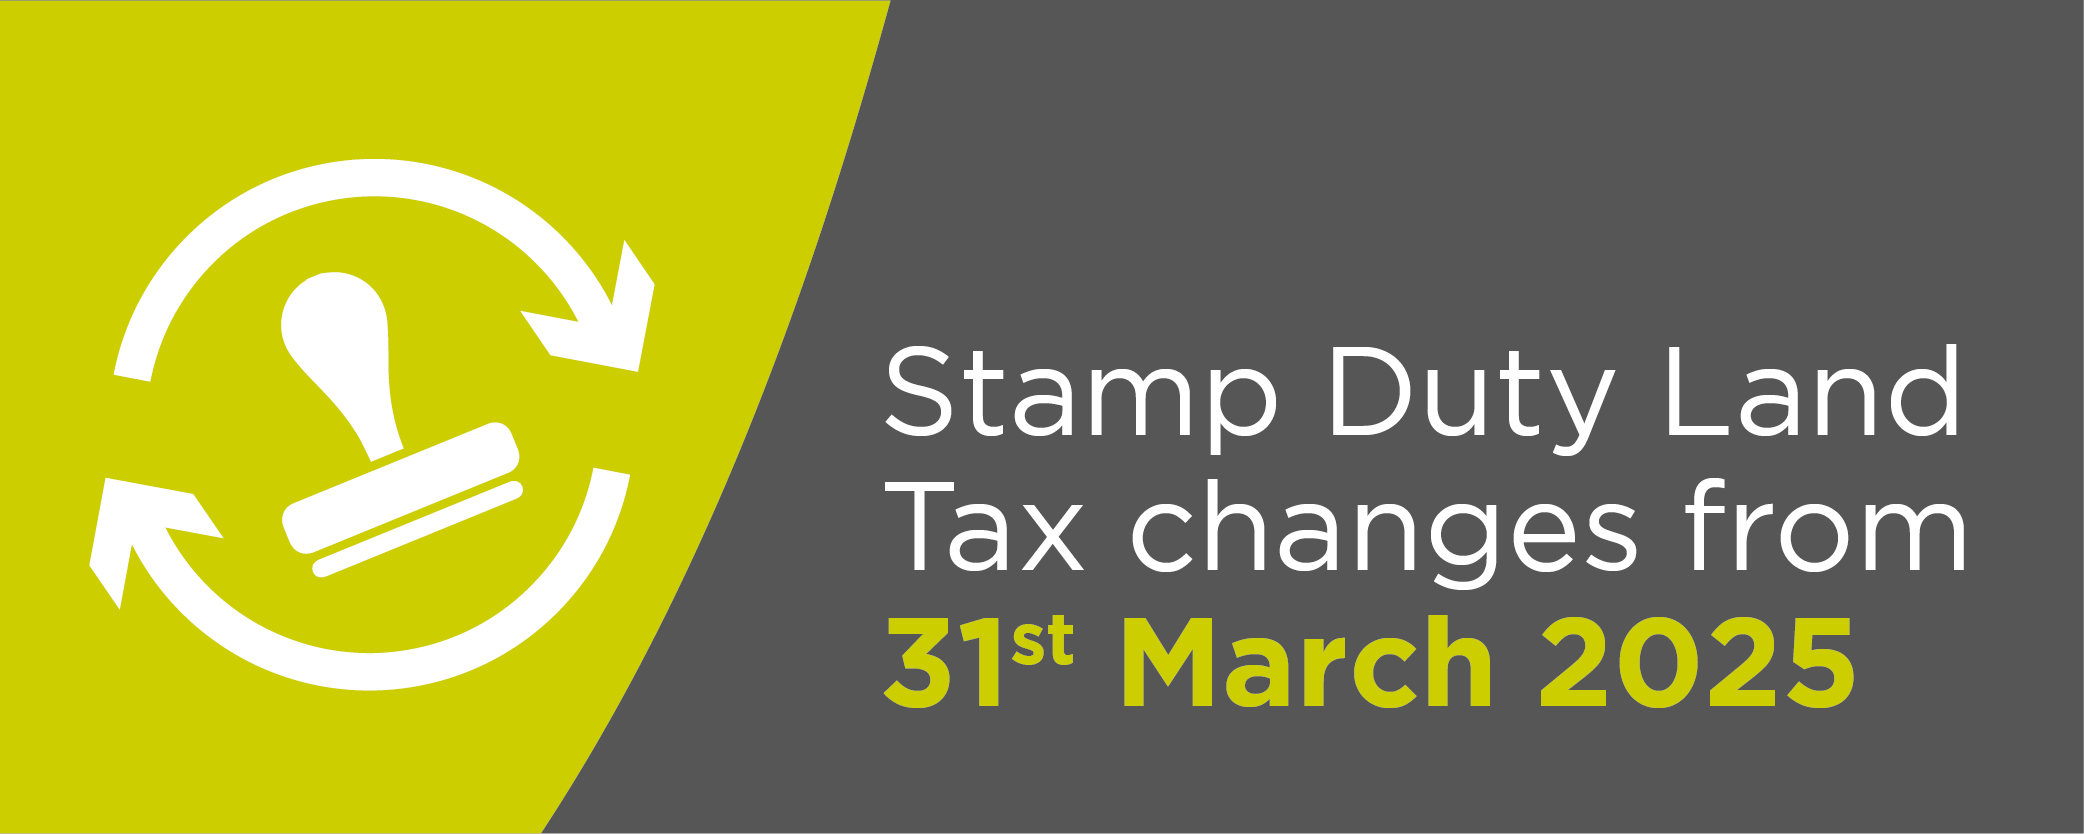 Stamp Duty Land Tax changes from 31 March 2025